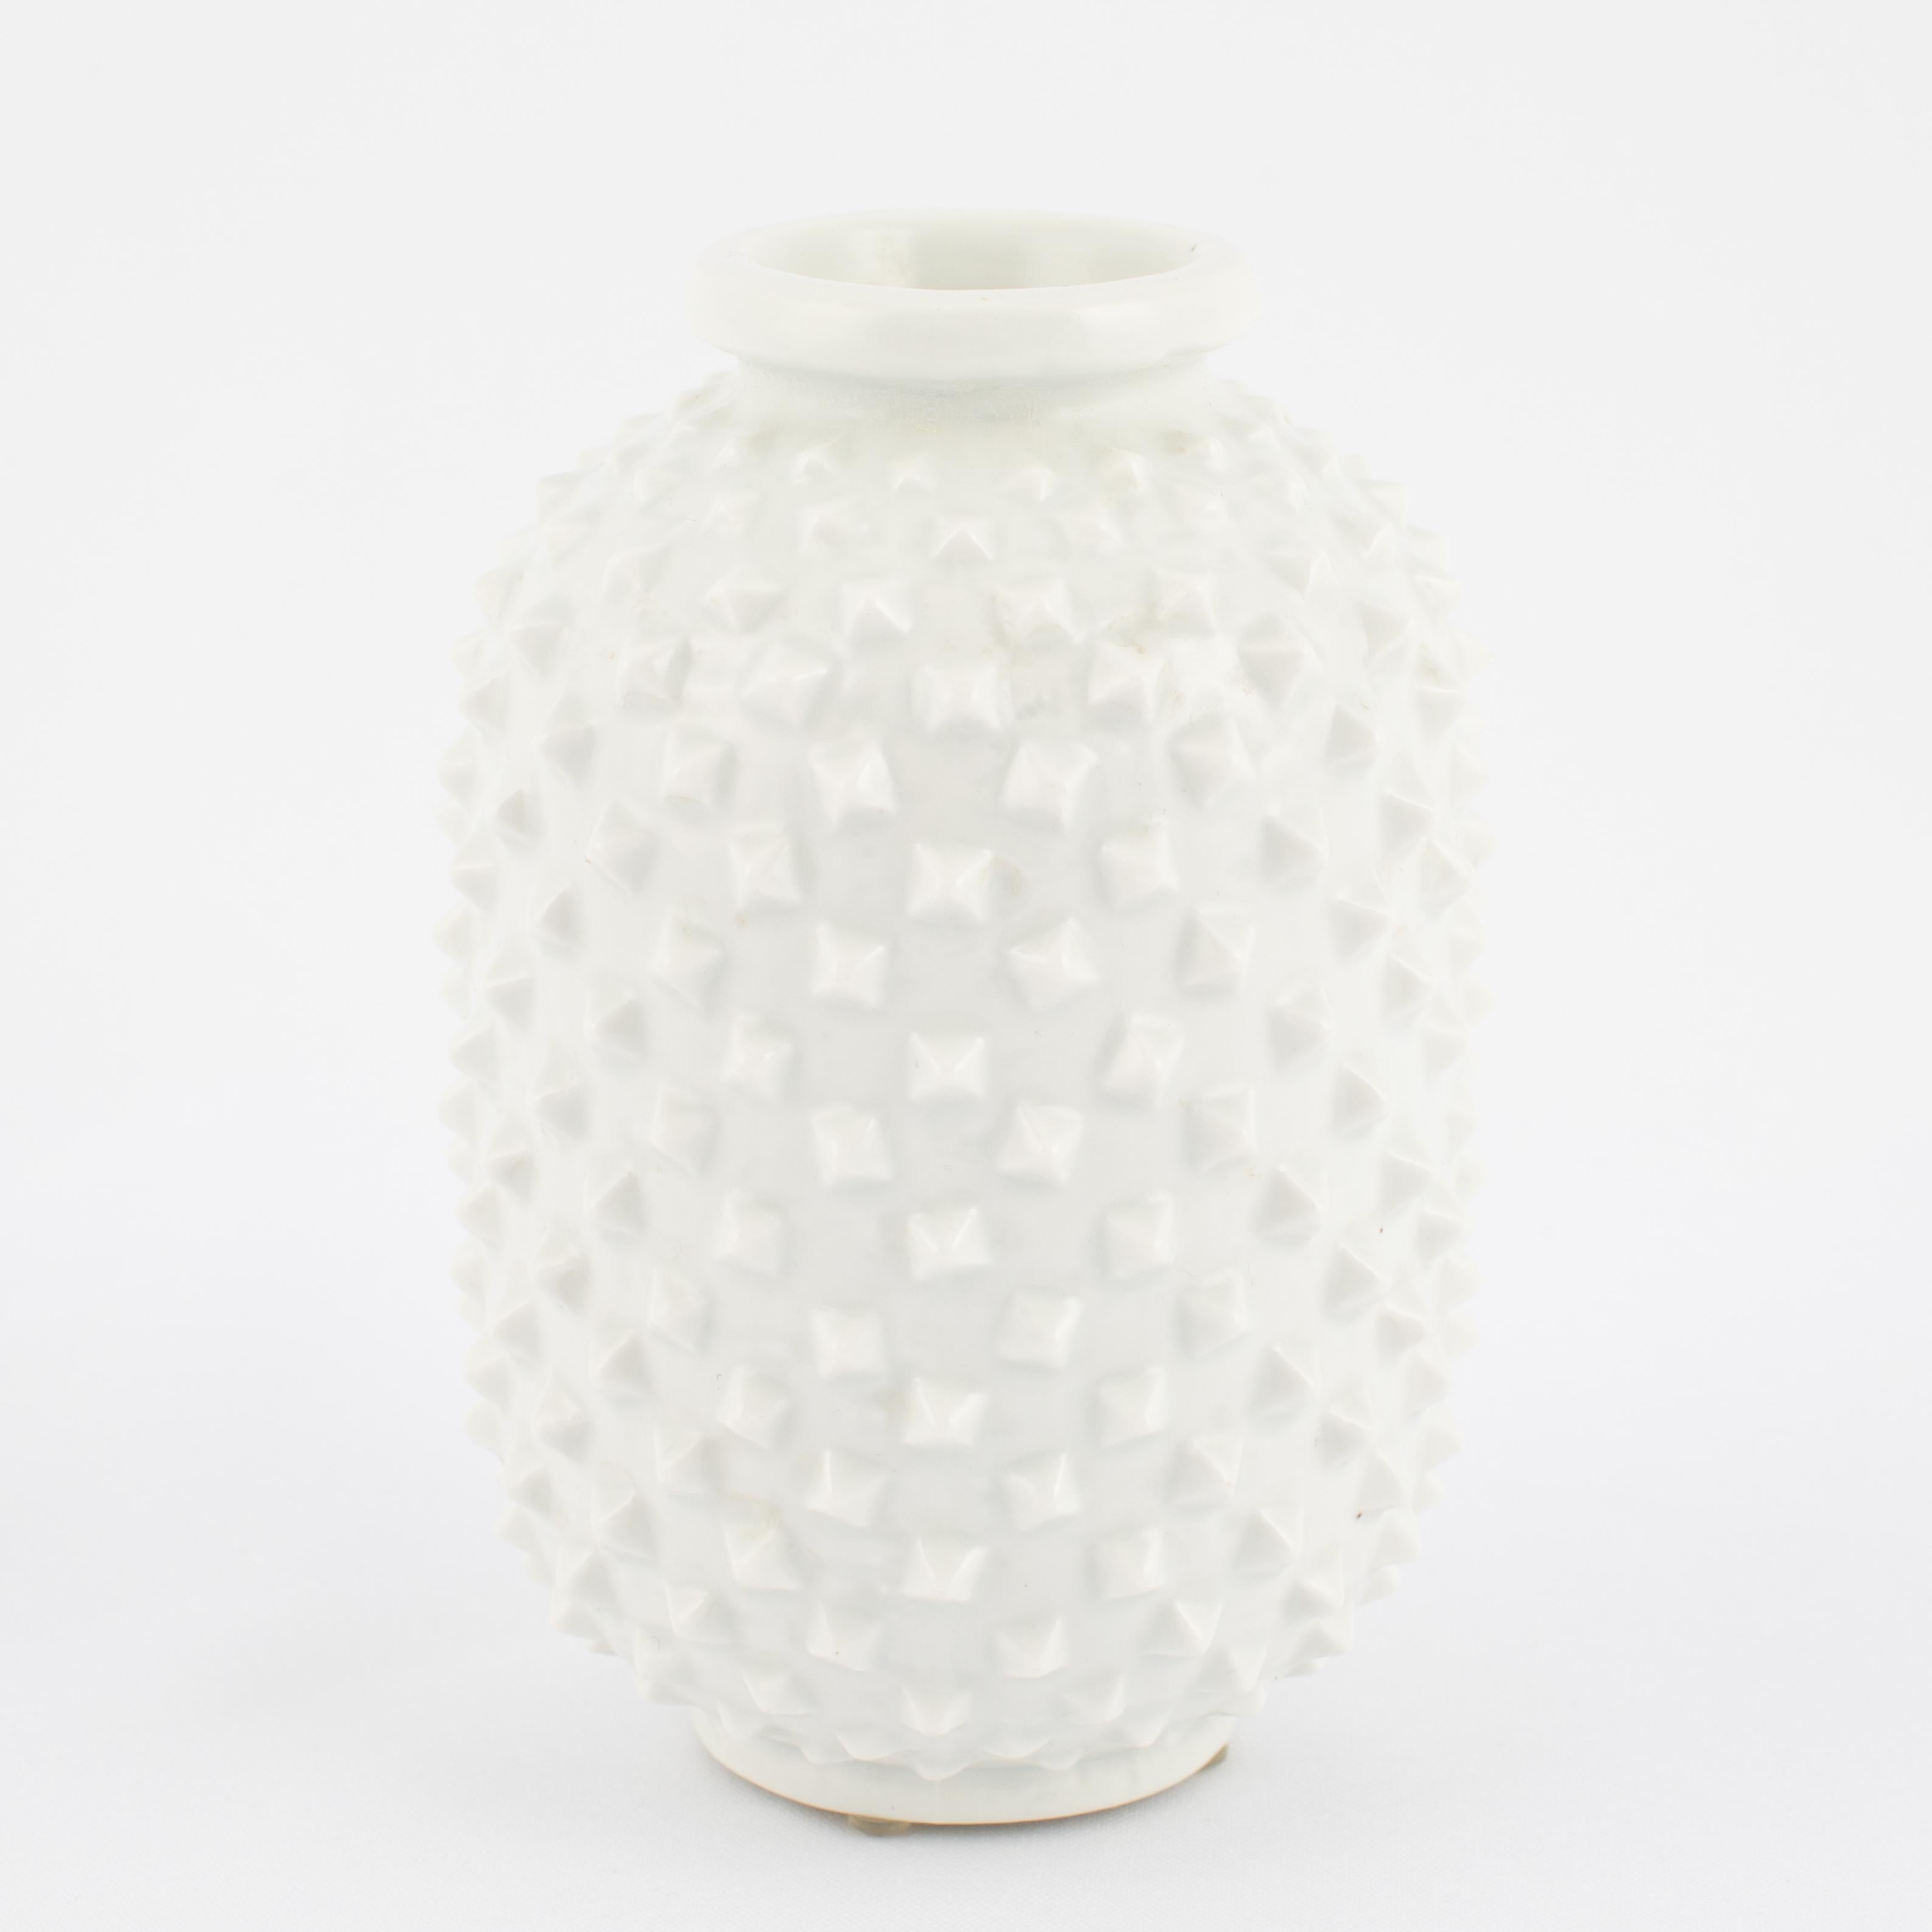 Striking trio of cylindrical vases covered in raised studs in a glossy white glaze, by Gunnar Nylund (1904-1997) for Rörstrand, designed in 1951. Each stamped on the bottom with the Rörstrand 